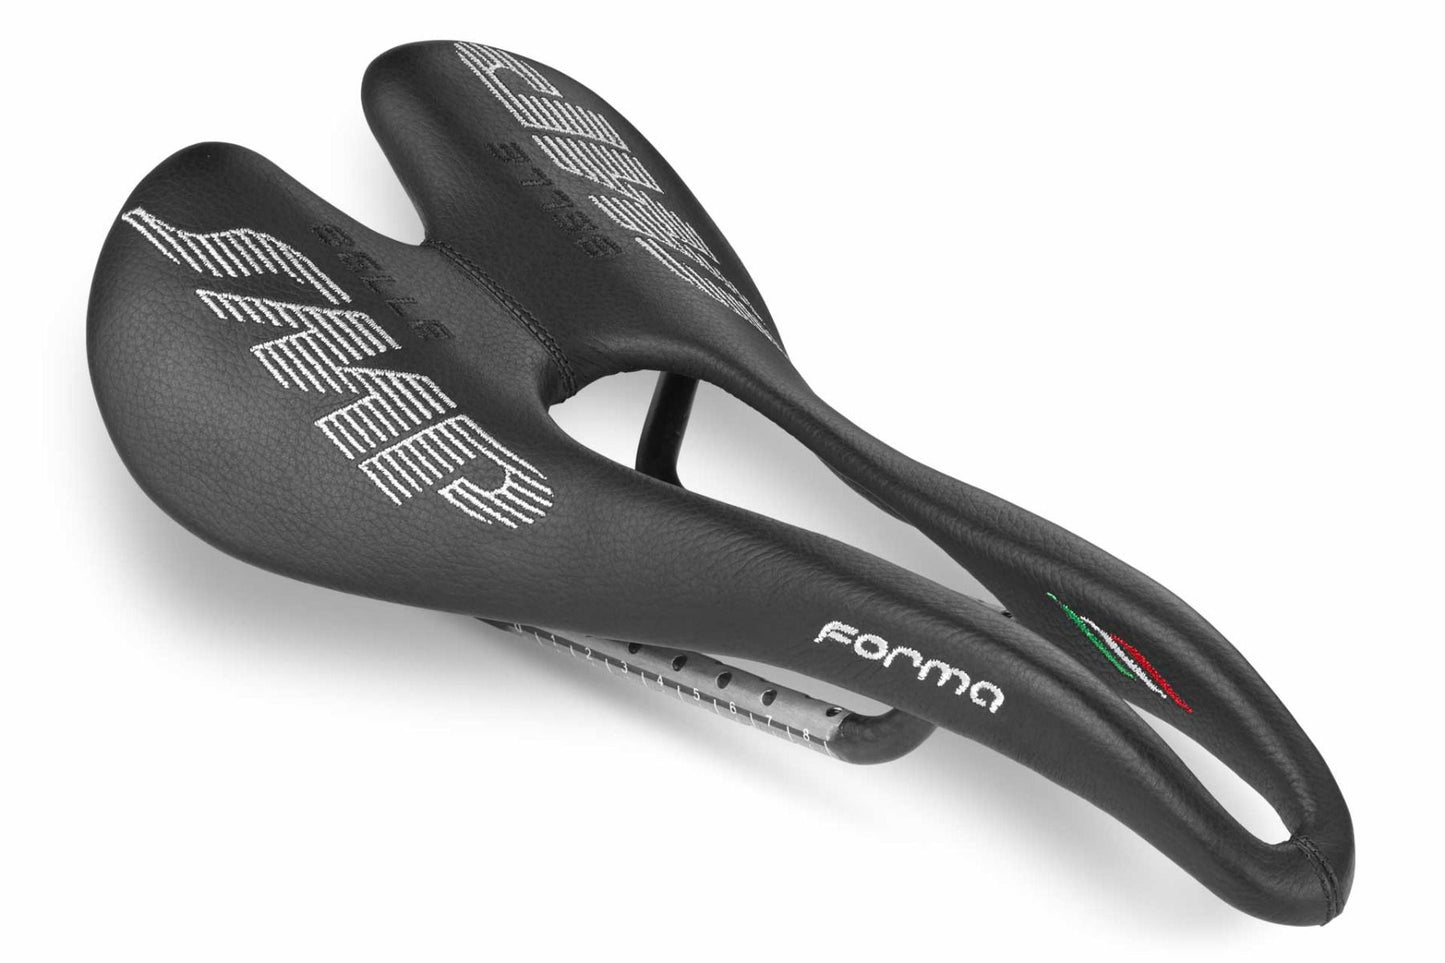 Selle SMP Forma Saddle with Carbon Rails (Black)